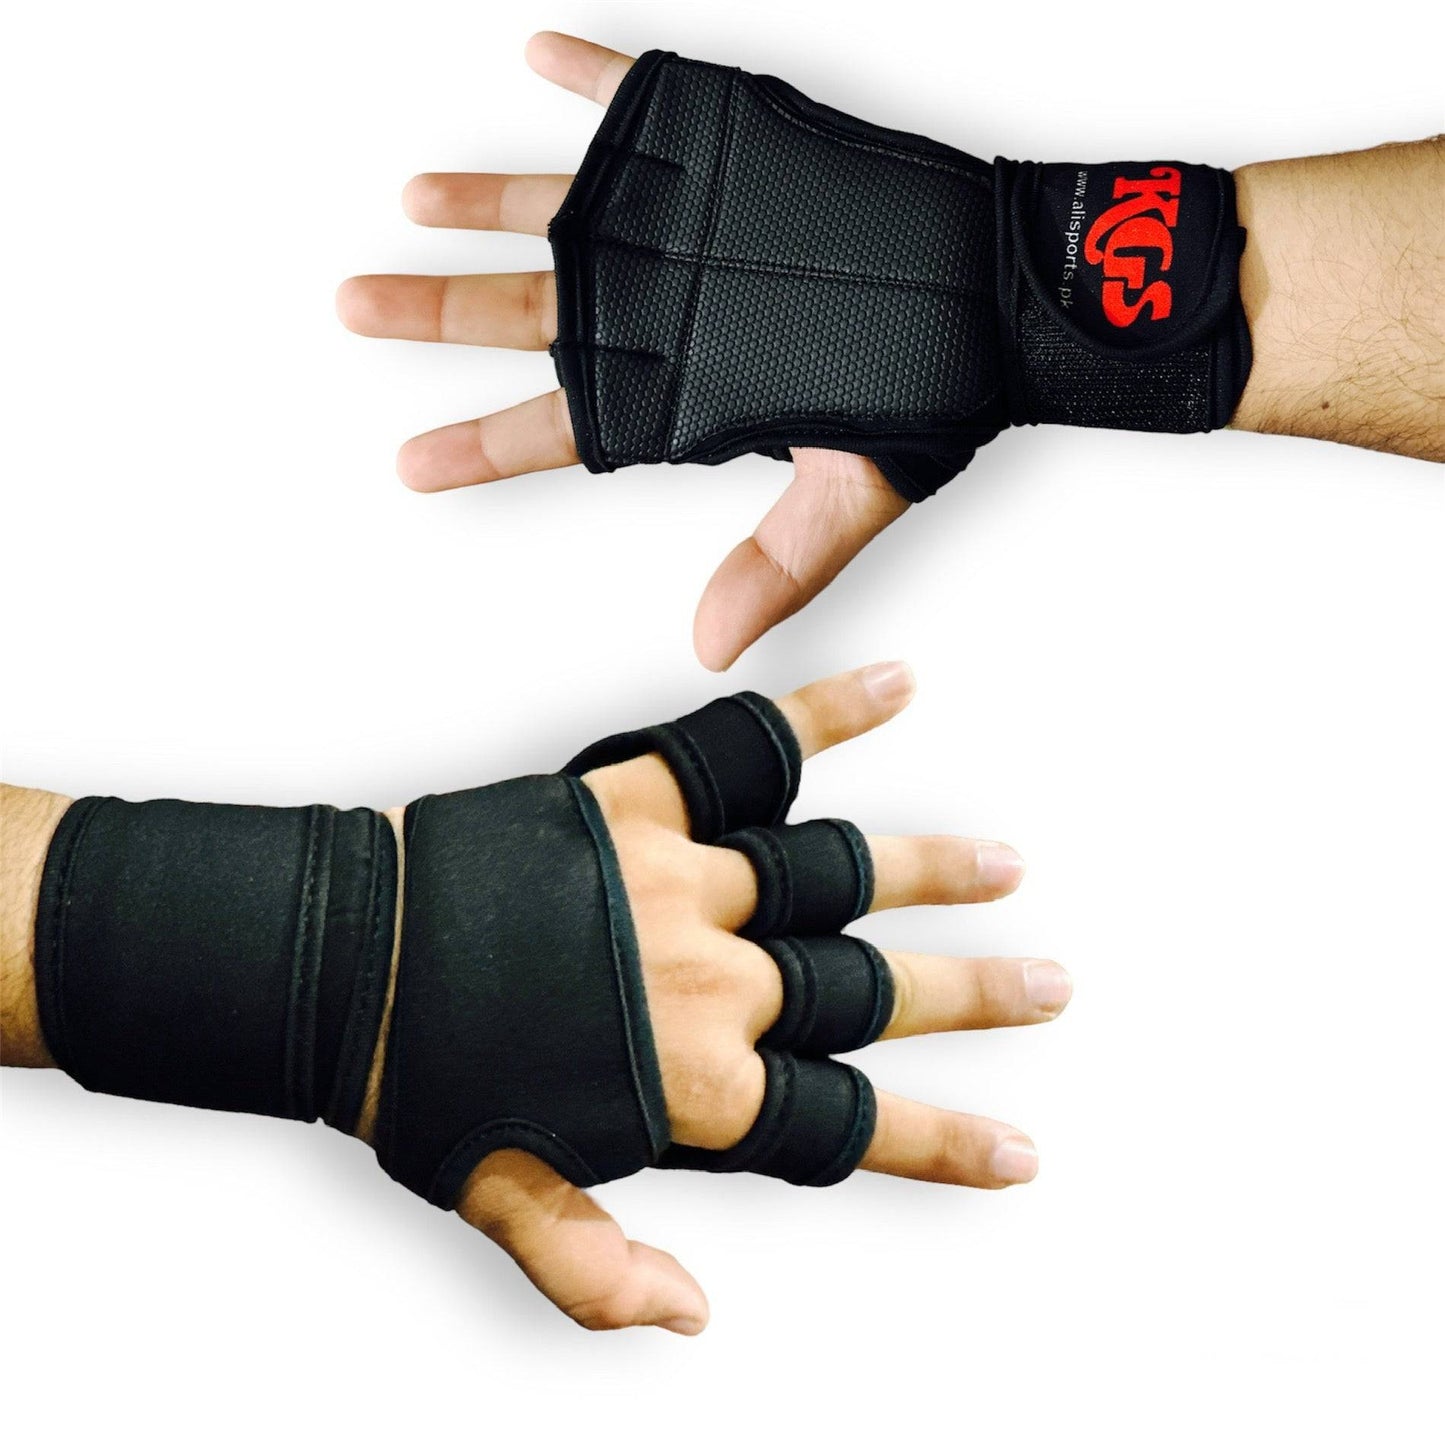 KGS G1 Weight Lifting Gym Gloves - Valetica Sports